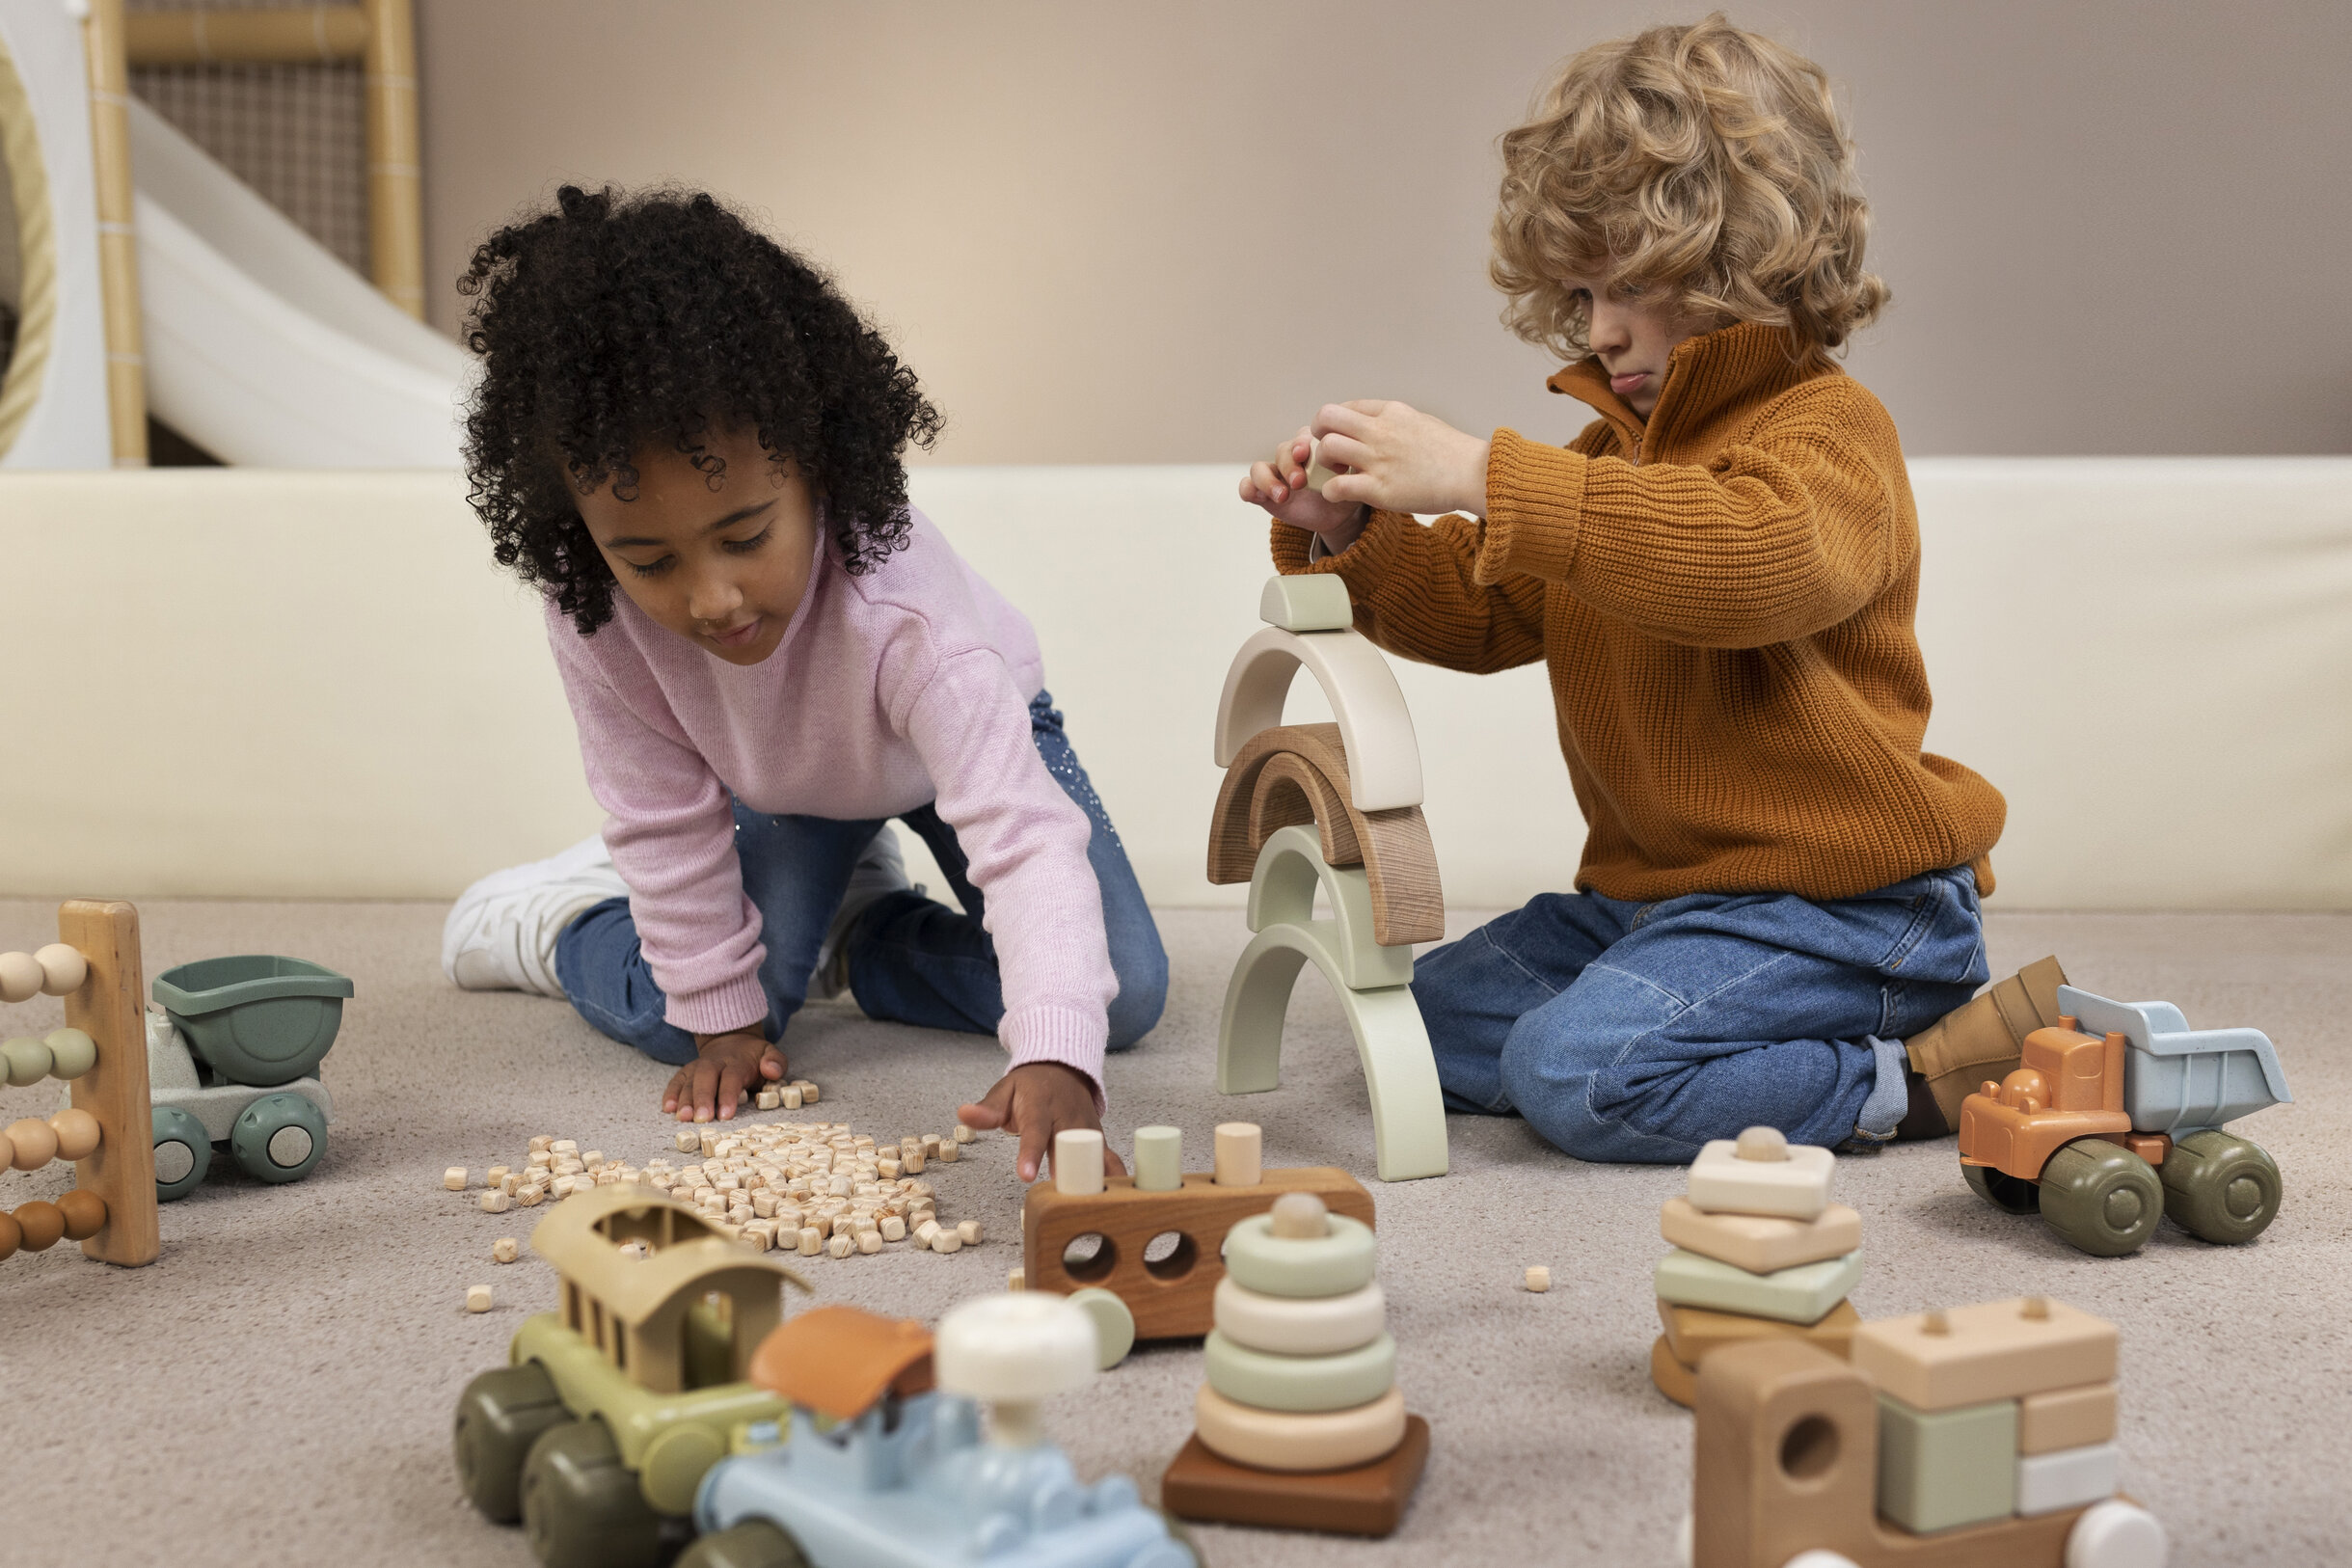 Montessori and Waldorf Approaches for Early Childhood